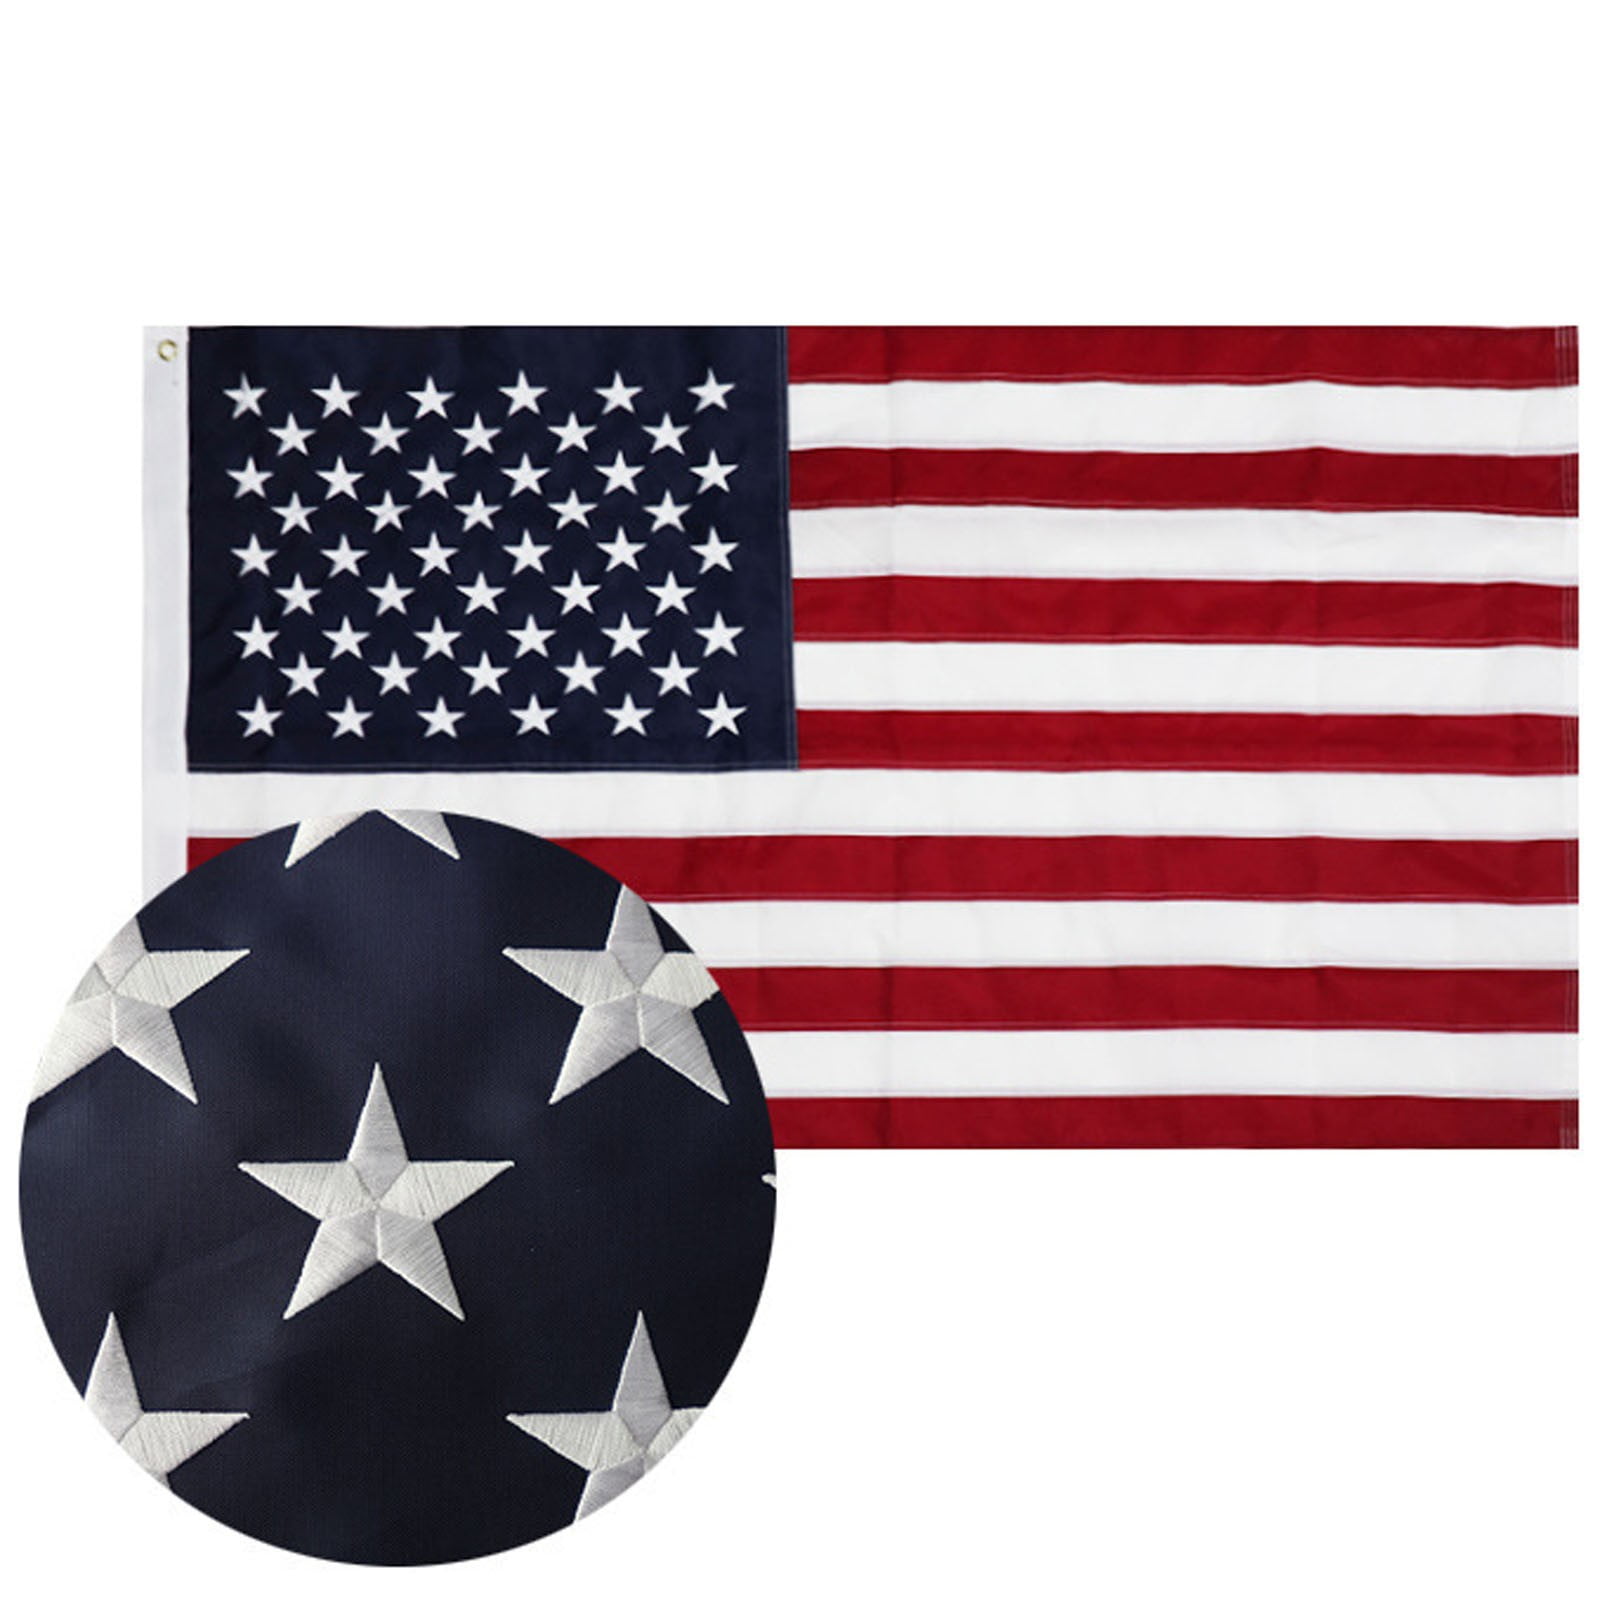 2x3 2'x3' Wholesale Combo State New York & New Jersey 2 Flags Flag 